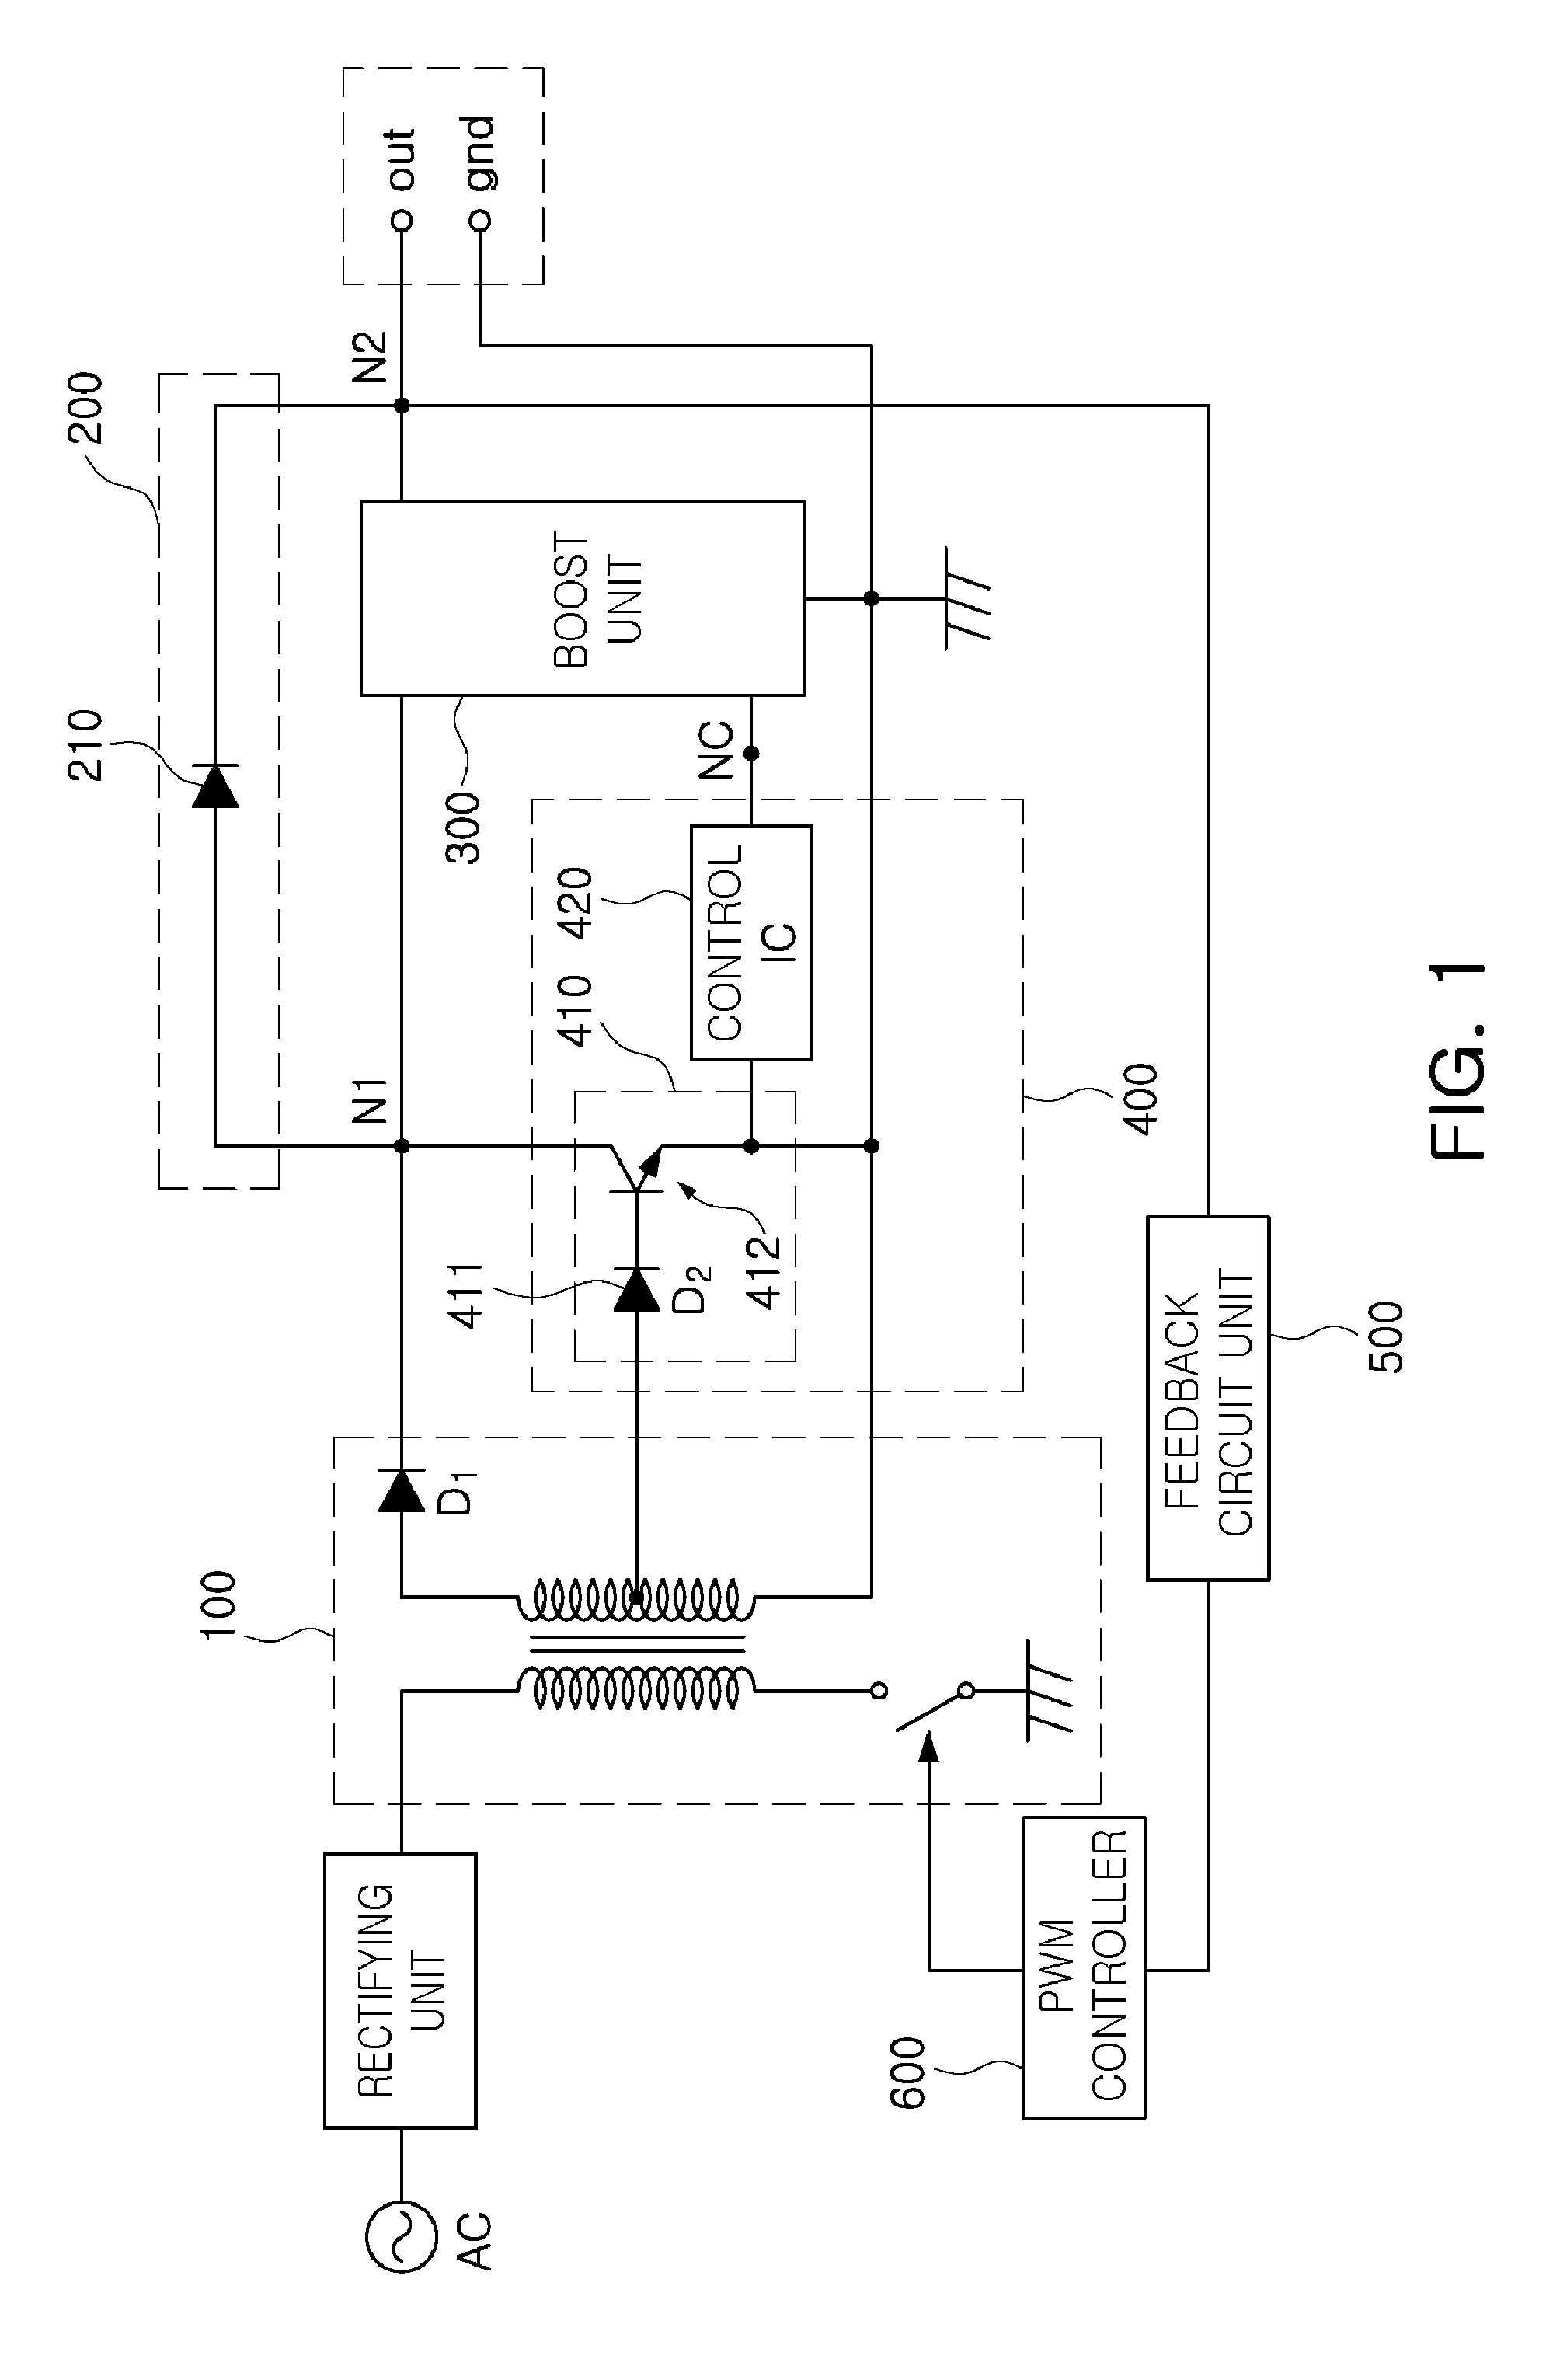 Switching mode power supply having multiple output